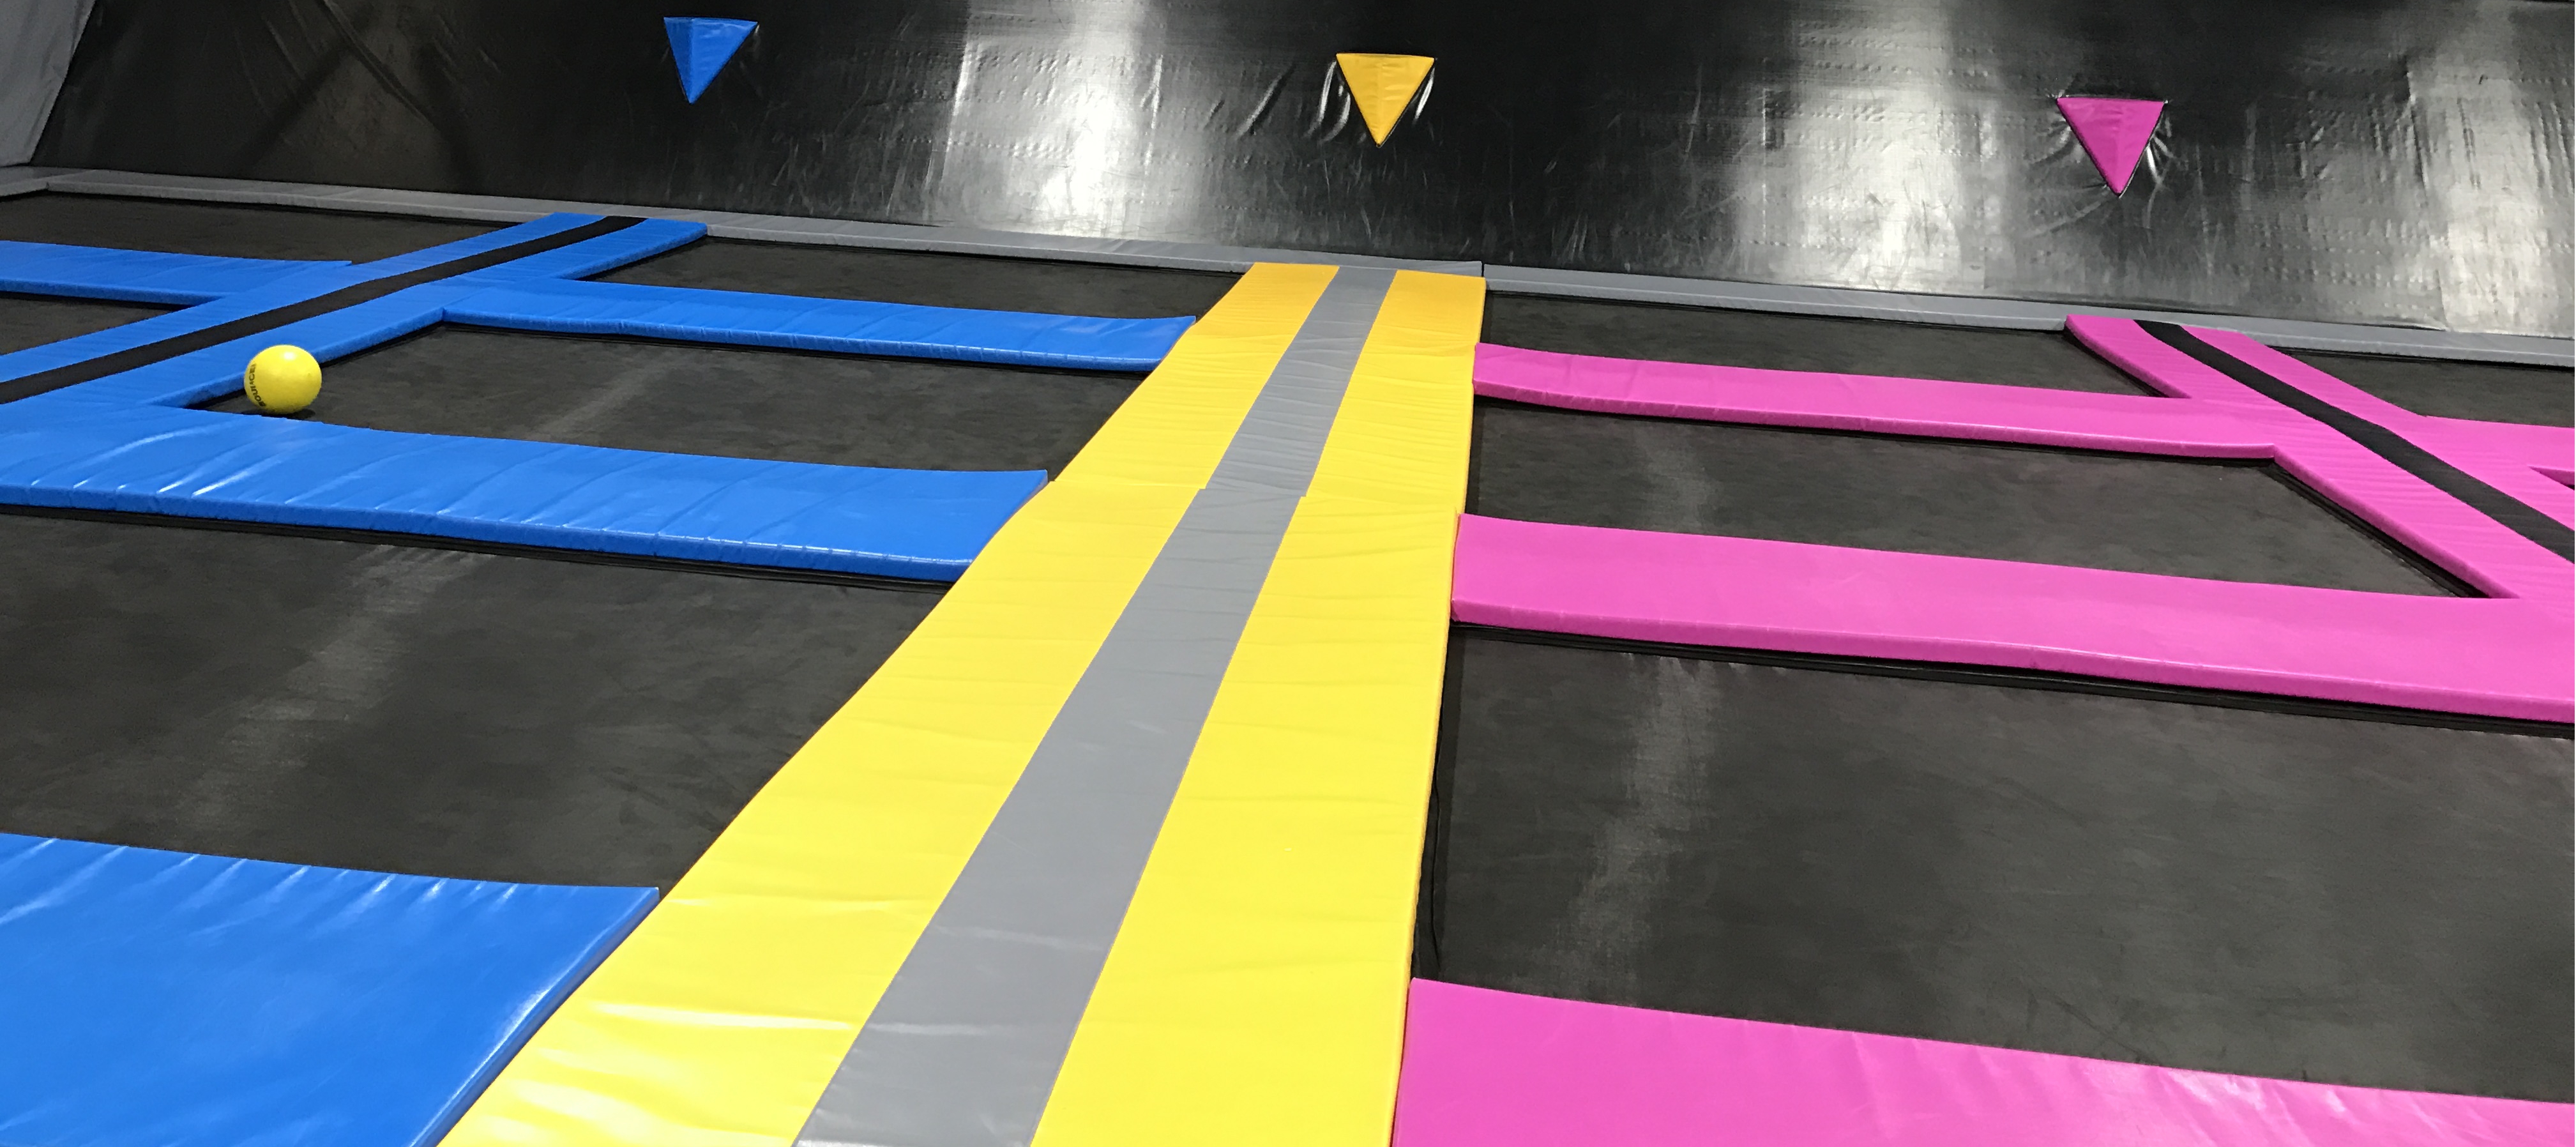 What to wear in trampoline park?